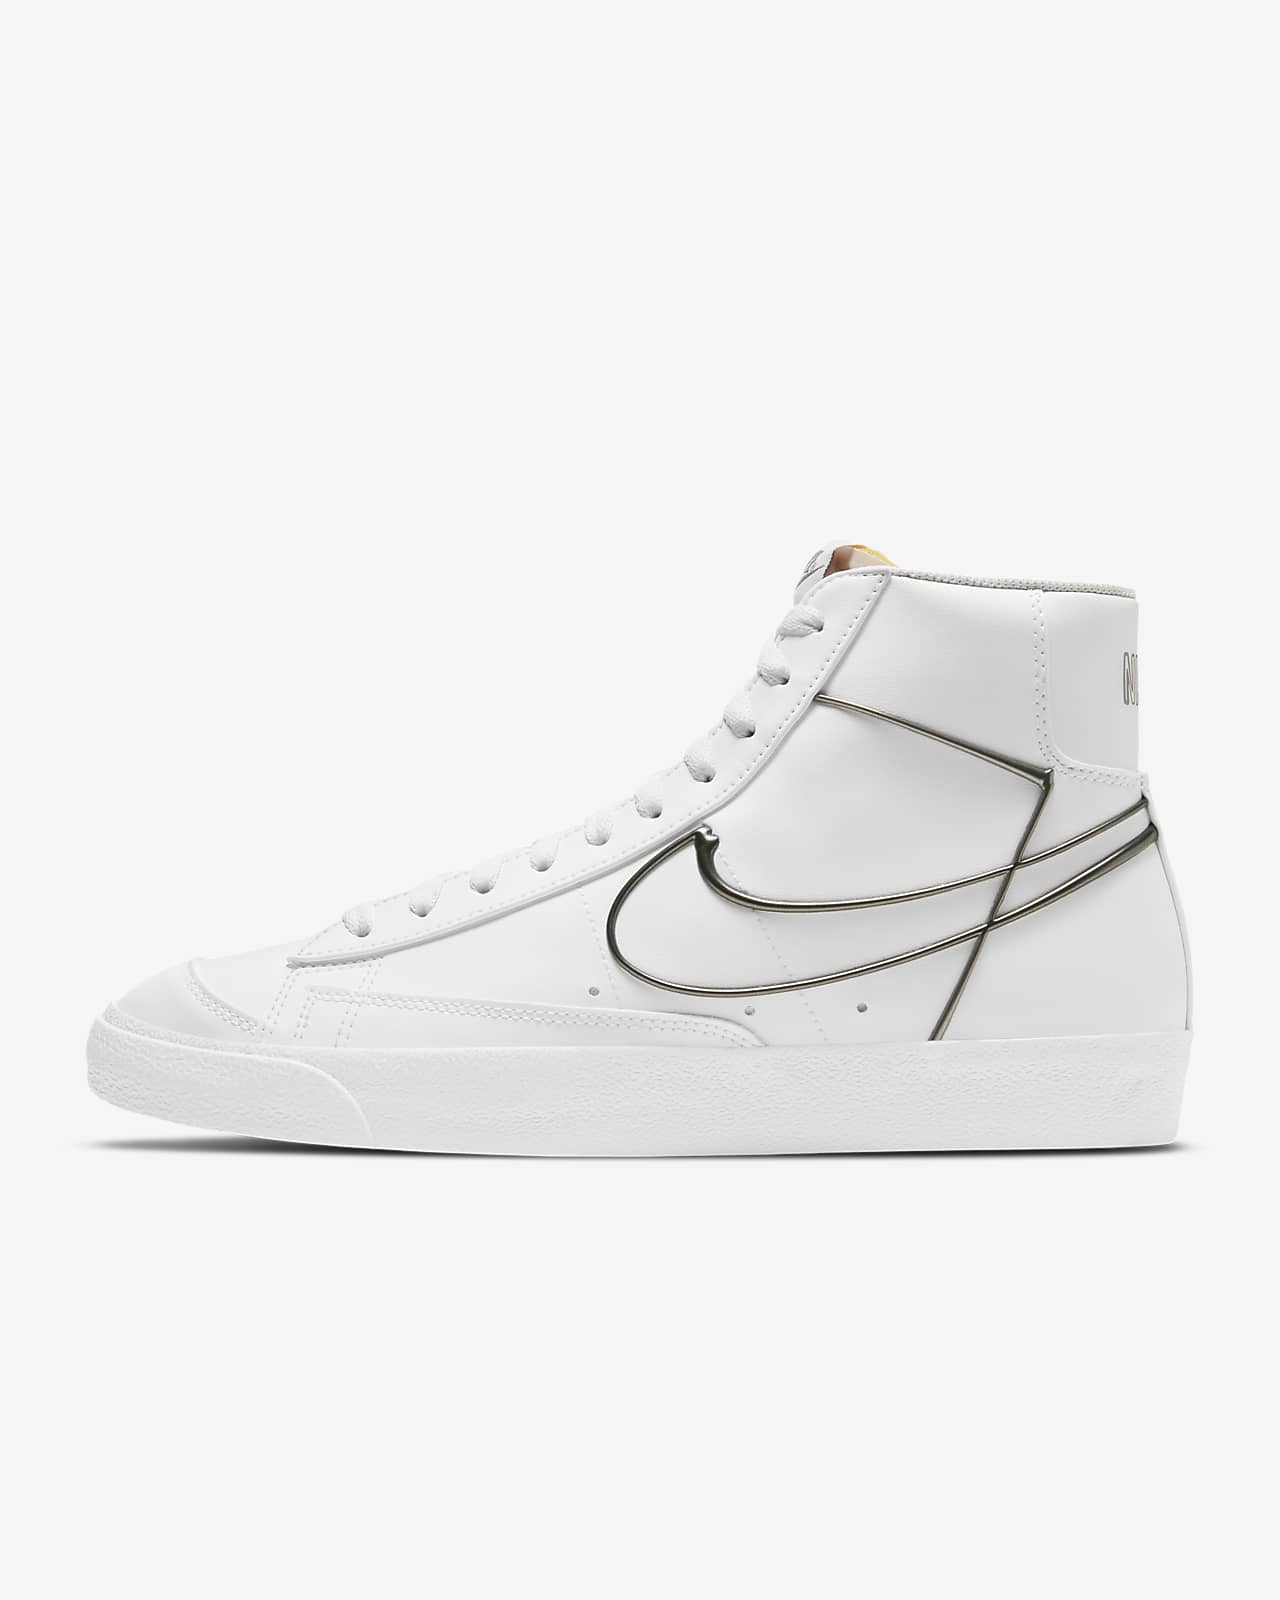 Chaussure Nike Blazer Mid '77 pour Homme